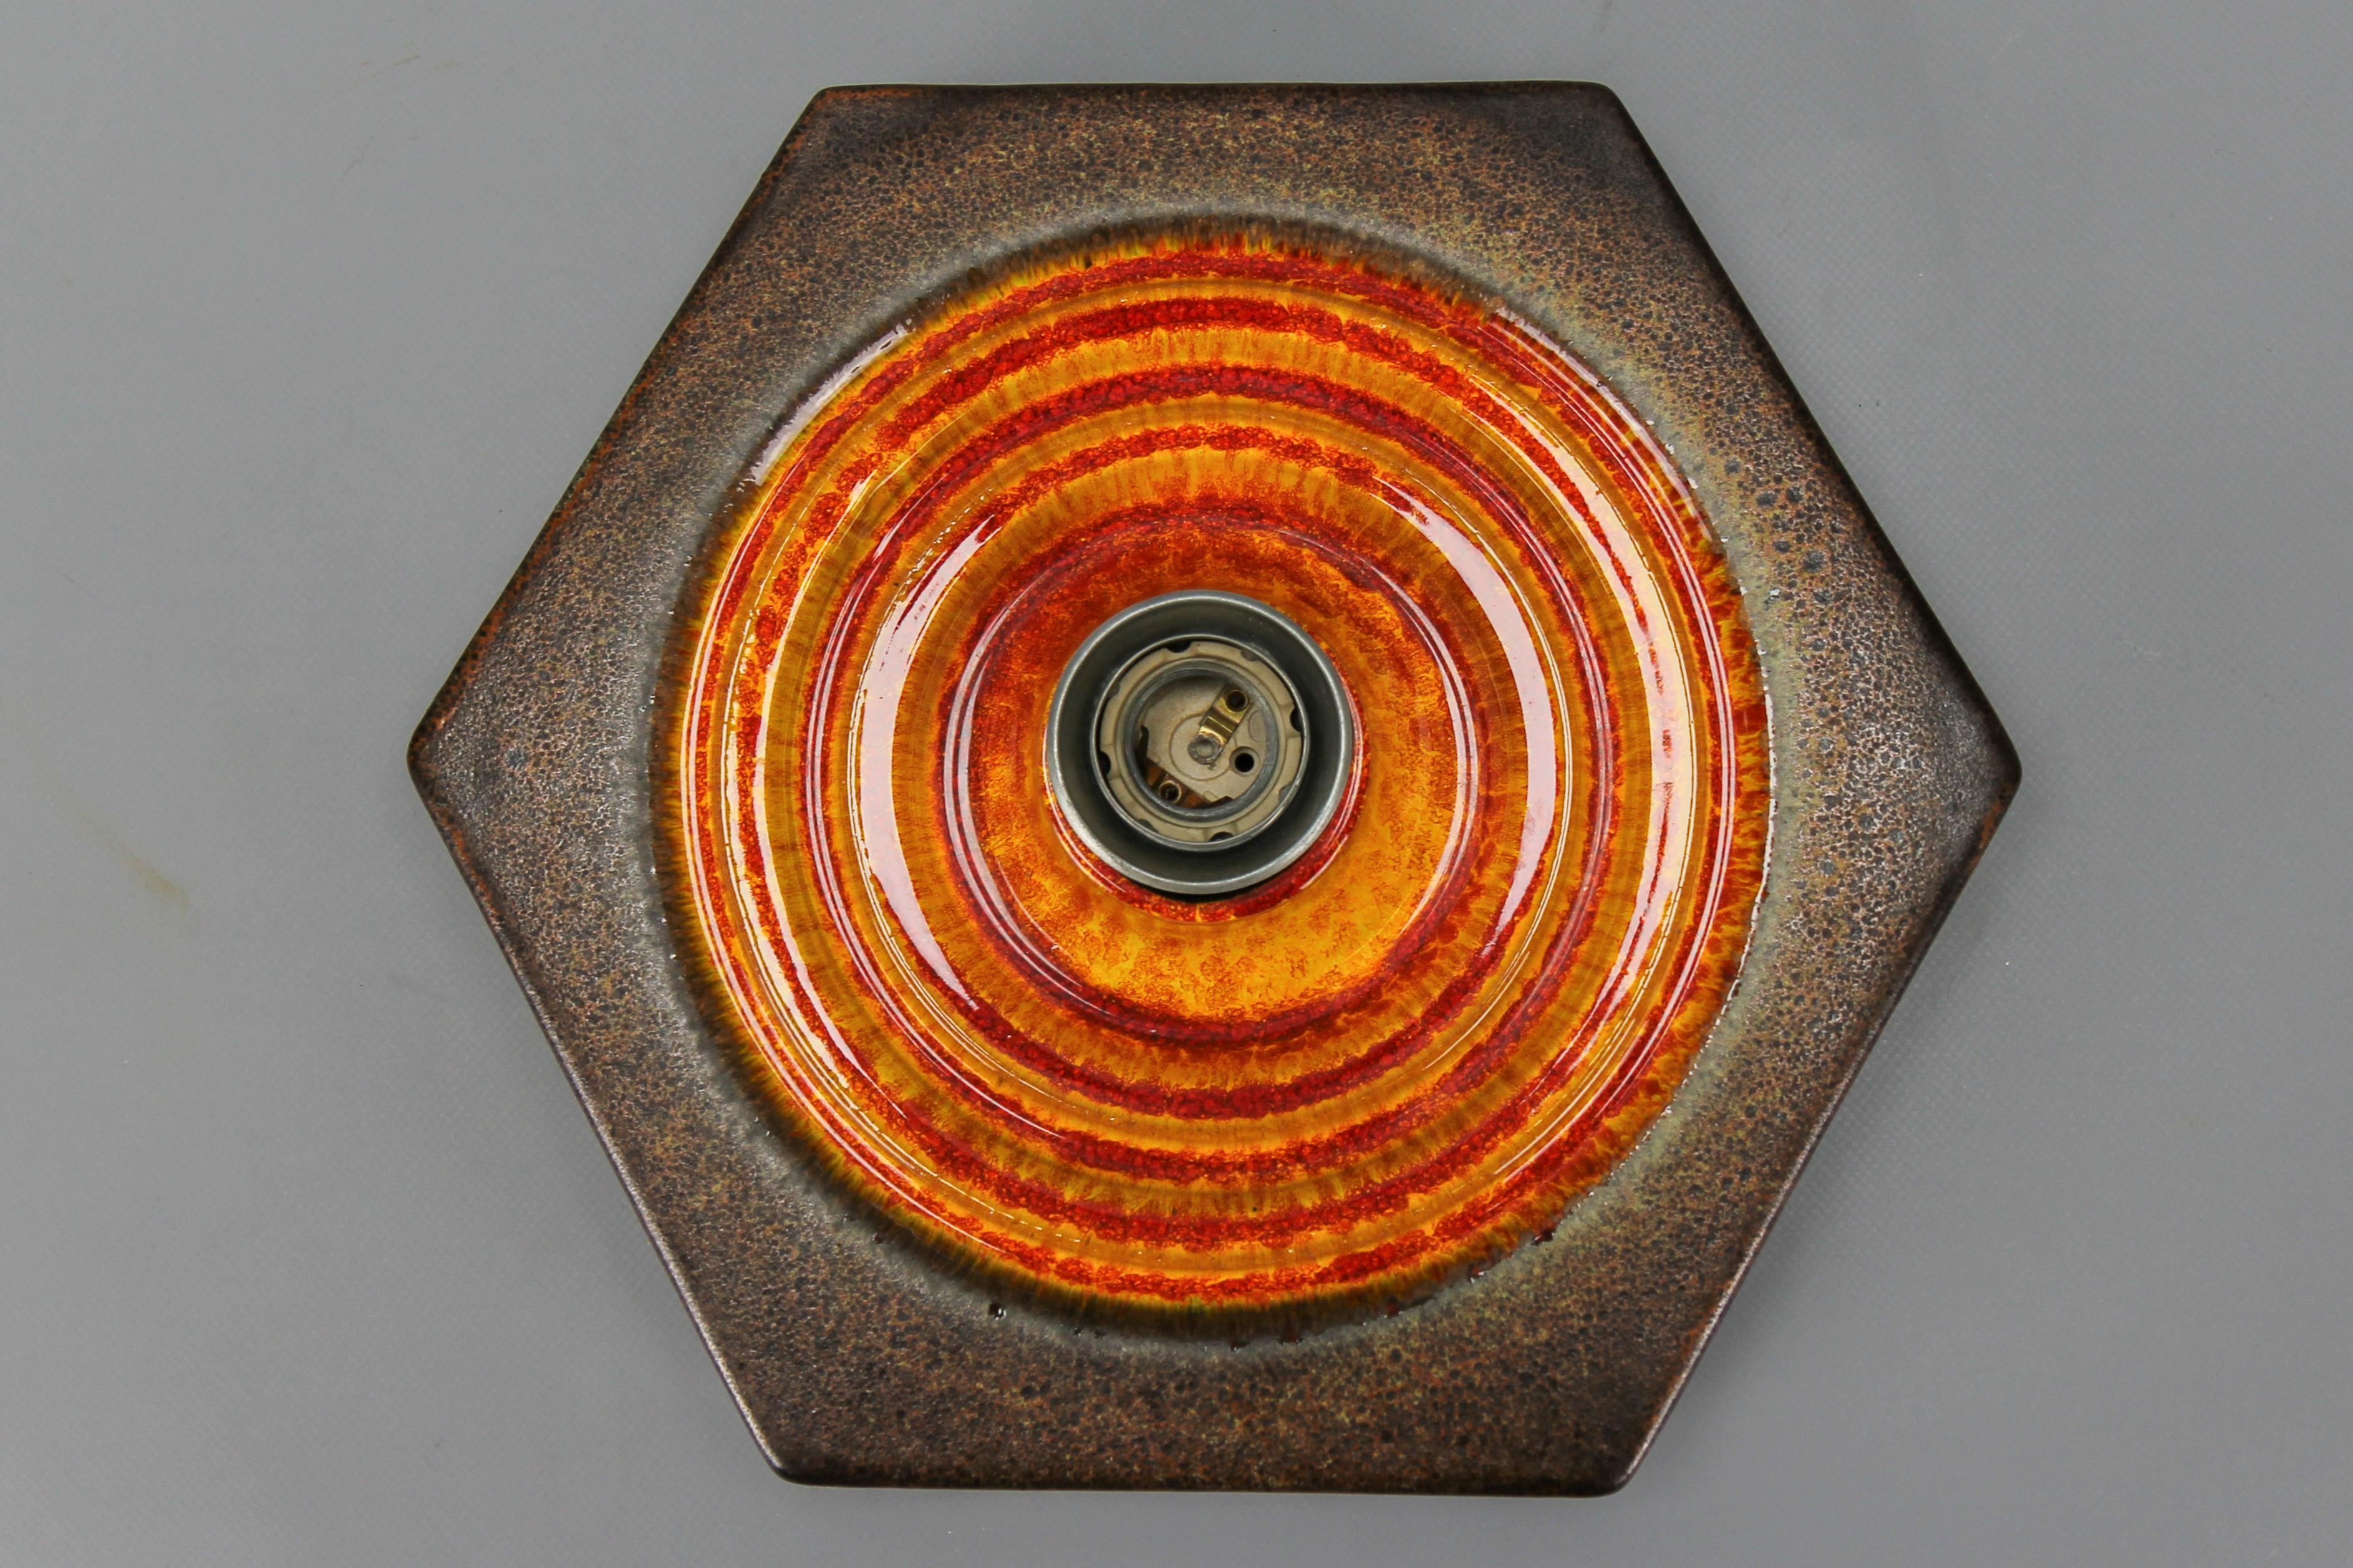 German fat lava orange and brown ceramic flush mount or sconce, 1970s.
A beautiful German Ceramic Fat Lava or West German Pottery, Modernist period, hexagonal ceramic flush mount or wall light in orange, brown, and red tones. Single light - one